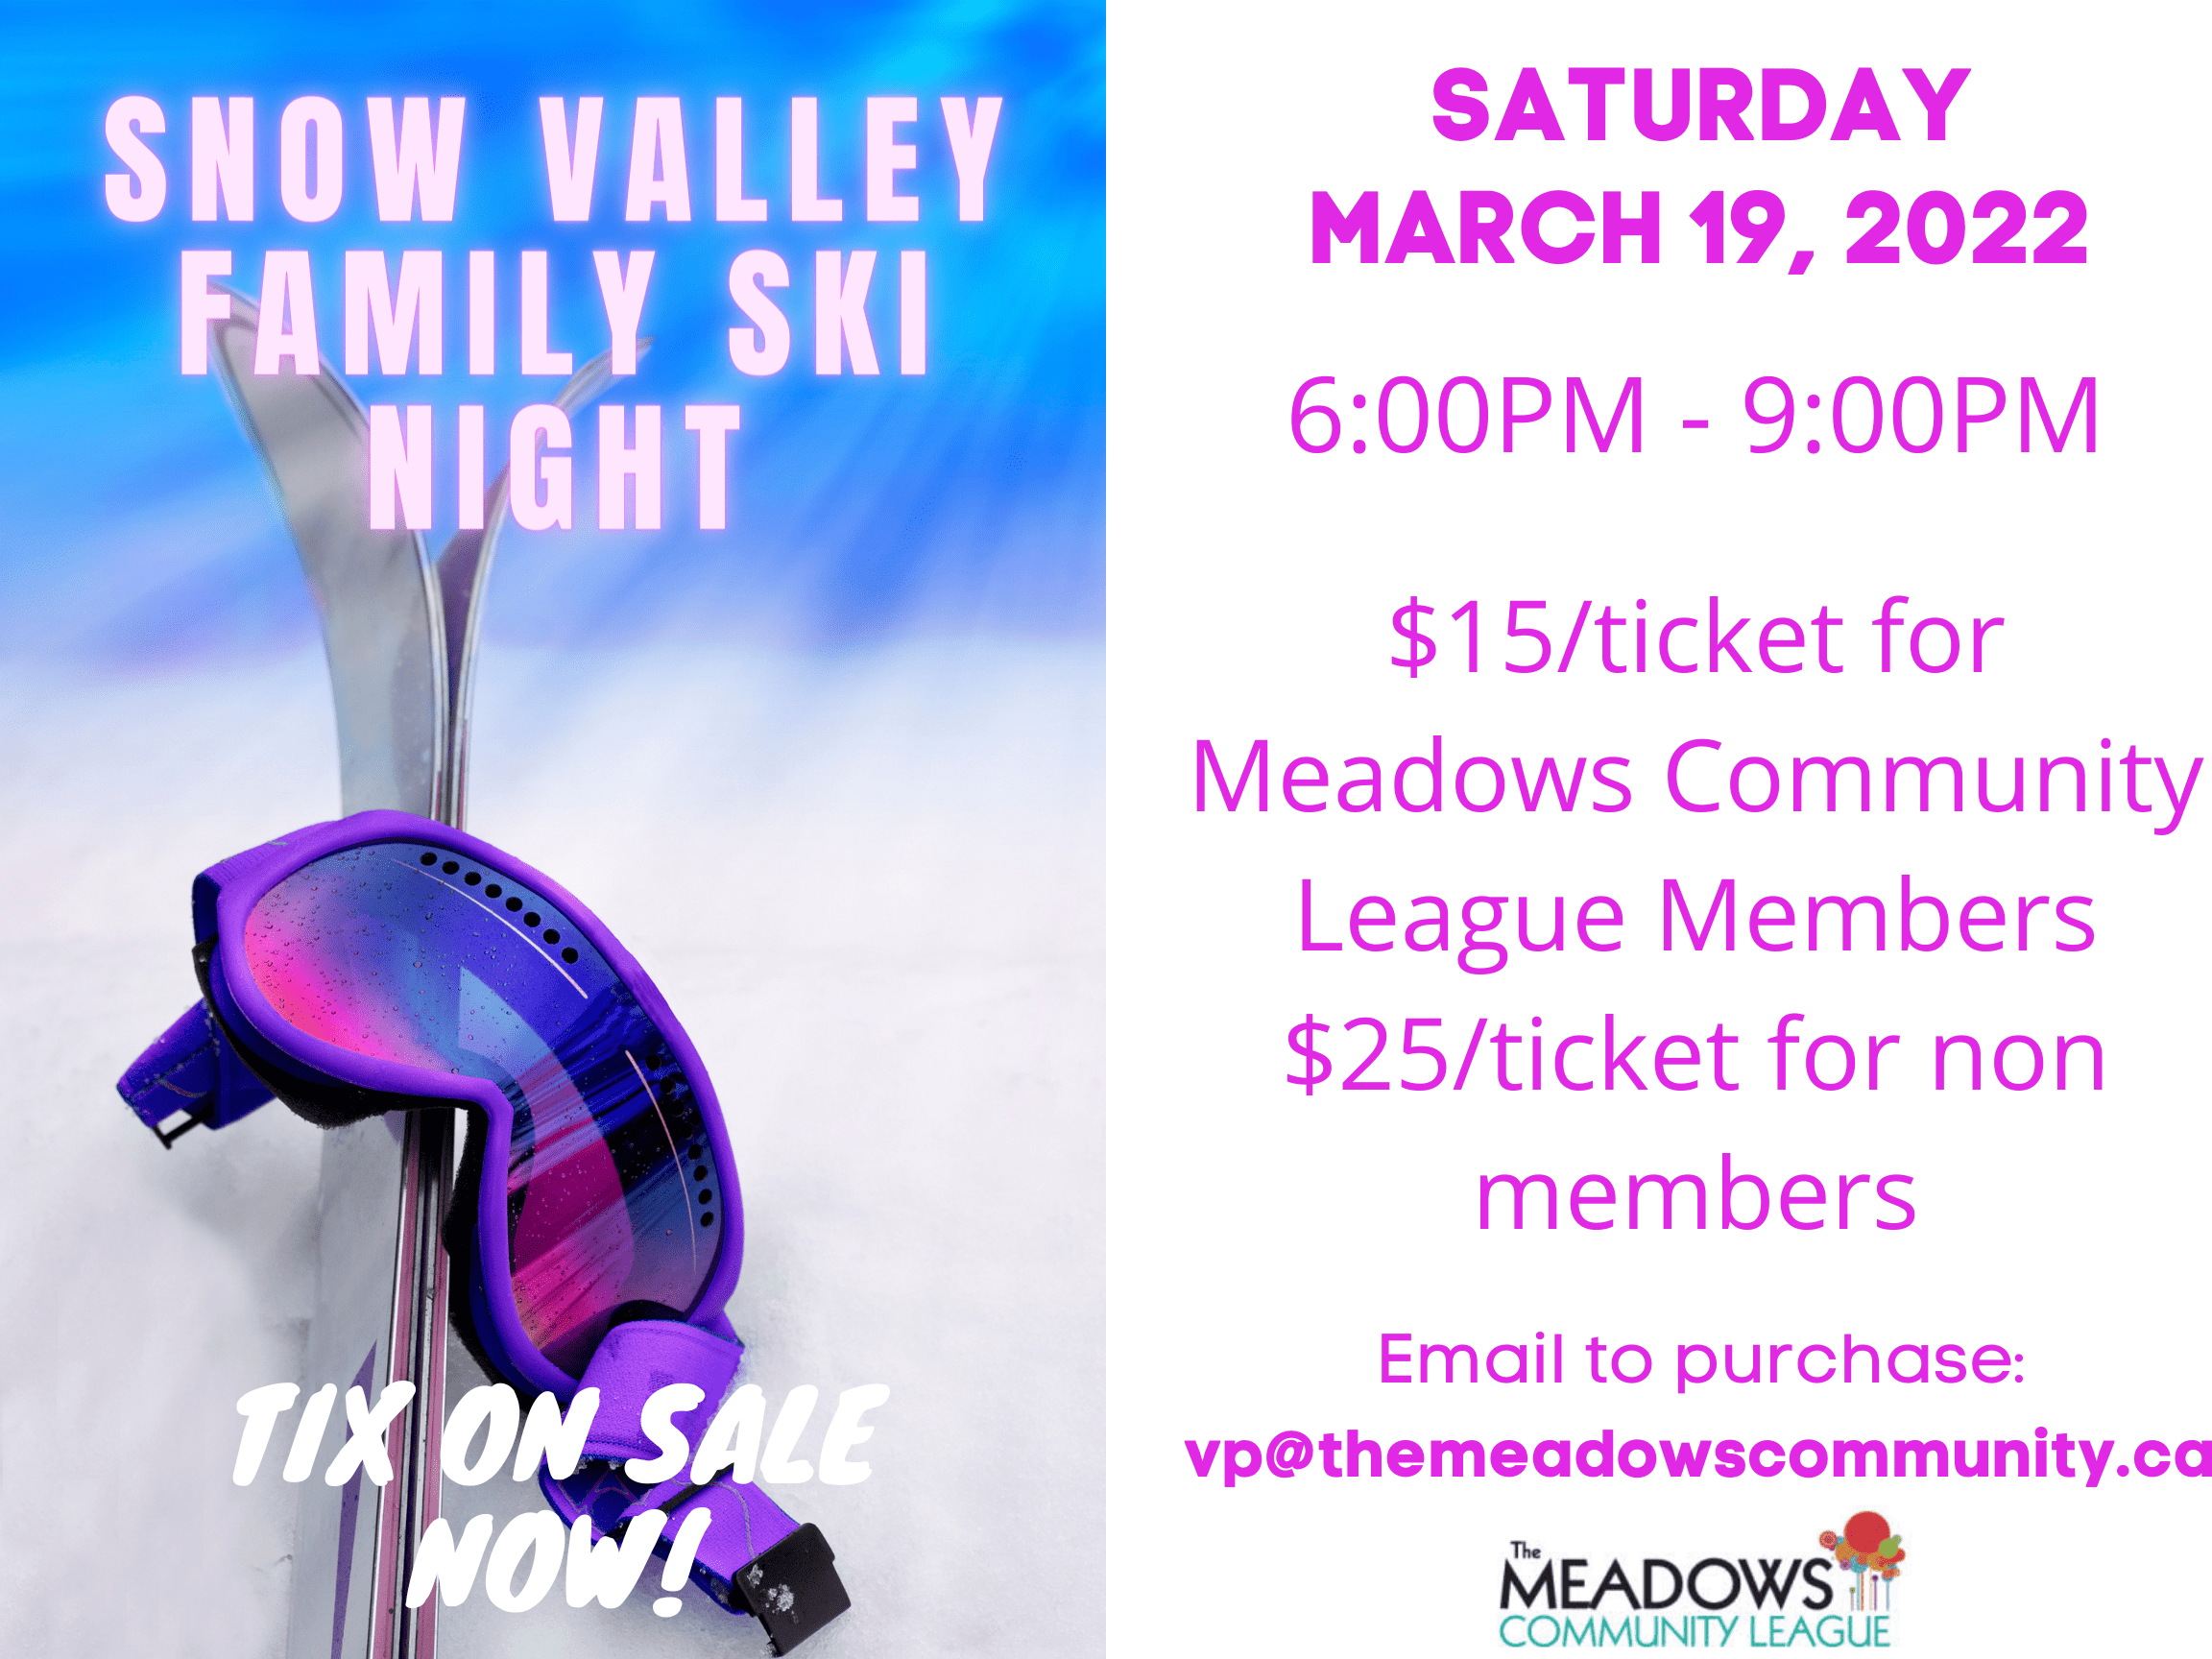 Purple ski goggles propped up against a set of skis in the snow. Bright blue sky and sun light streaking across the image. Bold pink letters read "Snow Valley Family Ski Night. Tix on Sale Now!"